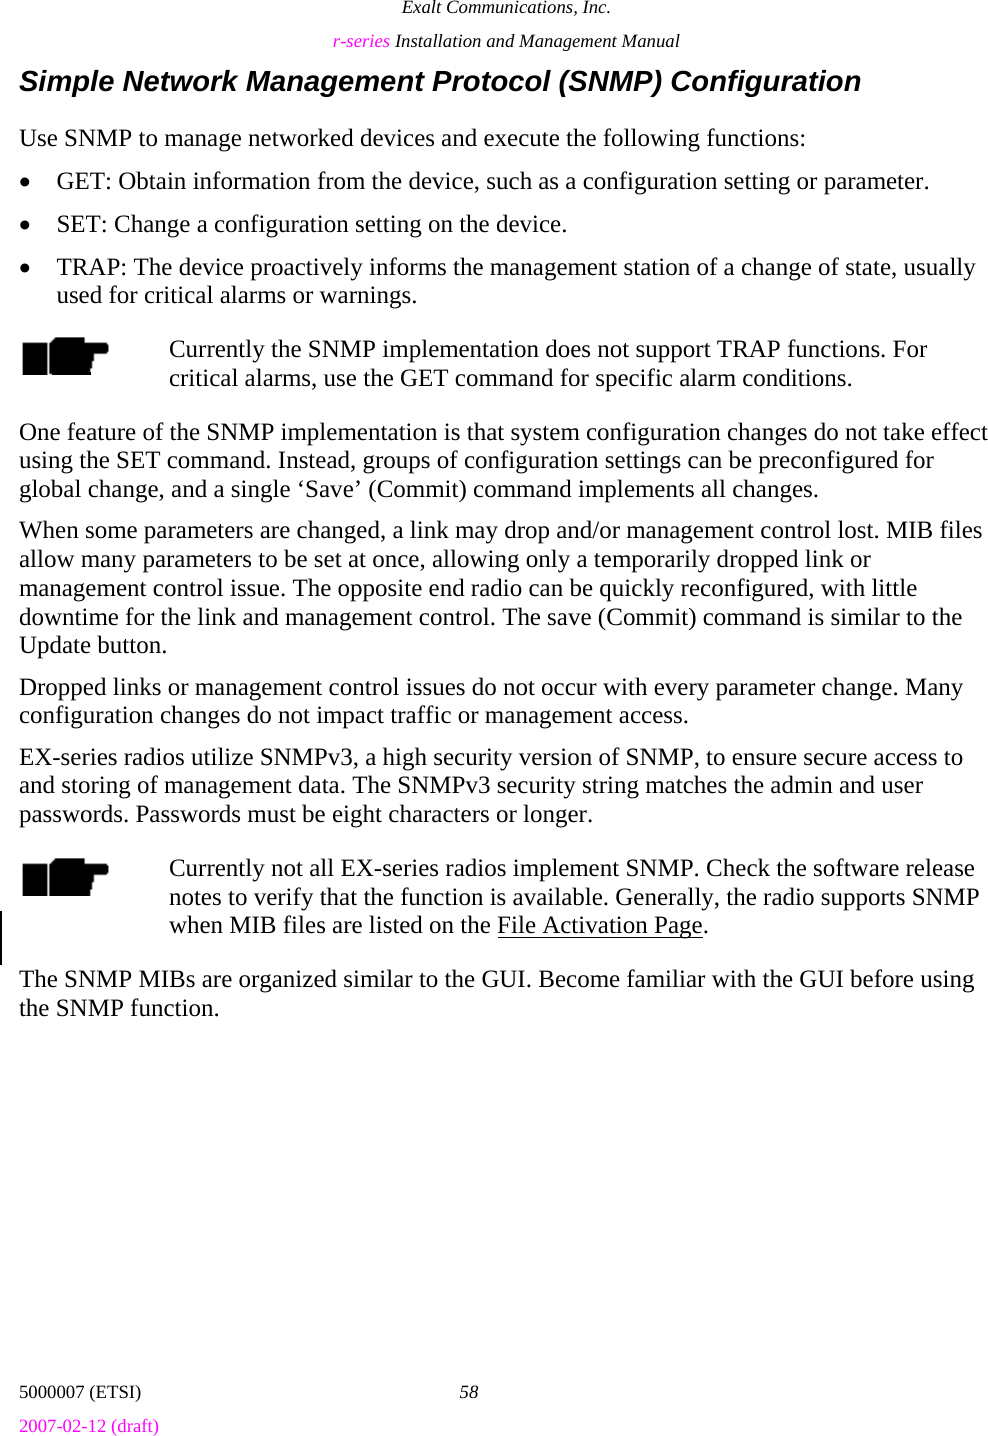 Exalt Communications, Inc. r-series Installation and Management Manual 5000007 (ETSI)  58 2007-02-12 (draft)  Simple Network Management Protocol (SNMP) Configuration Use SNMP to manage networked devices and execute the following functions: • GET: Obtain information from the device, such as a configuration setting or parameter. • SET: Change a configuration setting on the device. • TRAP: The device proactively informs the management station of a change of state, usually used for critical alarms or warnings. Currently the SNMP implementation does not support TRAP functions. For critical alarms, use the GET command for specific alarm conditions. One feature of the SNMP implementation is that system configuration changes do not take effect using the SET command. Instead, groups of configuration settings can be preconfigured for global change, and a single ‘Save’ (Commit) command implements all changes. When some parameters are changed, a link may drop and/or management control lost. MIB files allow many parameters to be set at once, allowing only a temporarily dropped link or management control issue. The opposite end radio can be quickly reconfigured, with little downtime for the link and management control. The save (Commit) command is similar to the Update button.  Dropped links or management control issues do not occur with every parameter change. Many configuration changes do not impact traffic or management access. EX-series radios utilize SNMPv3, a high security version of SNMP, to ensure secure access to and storing of management data. The SNMPv3 security string matches the admin and user passwords. Passwords must be eight characters or longer. Currently not all EX-series radios implement SNMP. Check the software release notes to verify that the function is available. Generally, the radio supports SNMP when MIB files are listed on the File Activation Page. The SNMP MIBs are organized similar to the GUI. Become familiar with the GUI before using the SNMP function. 